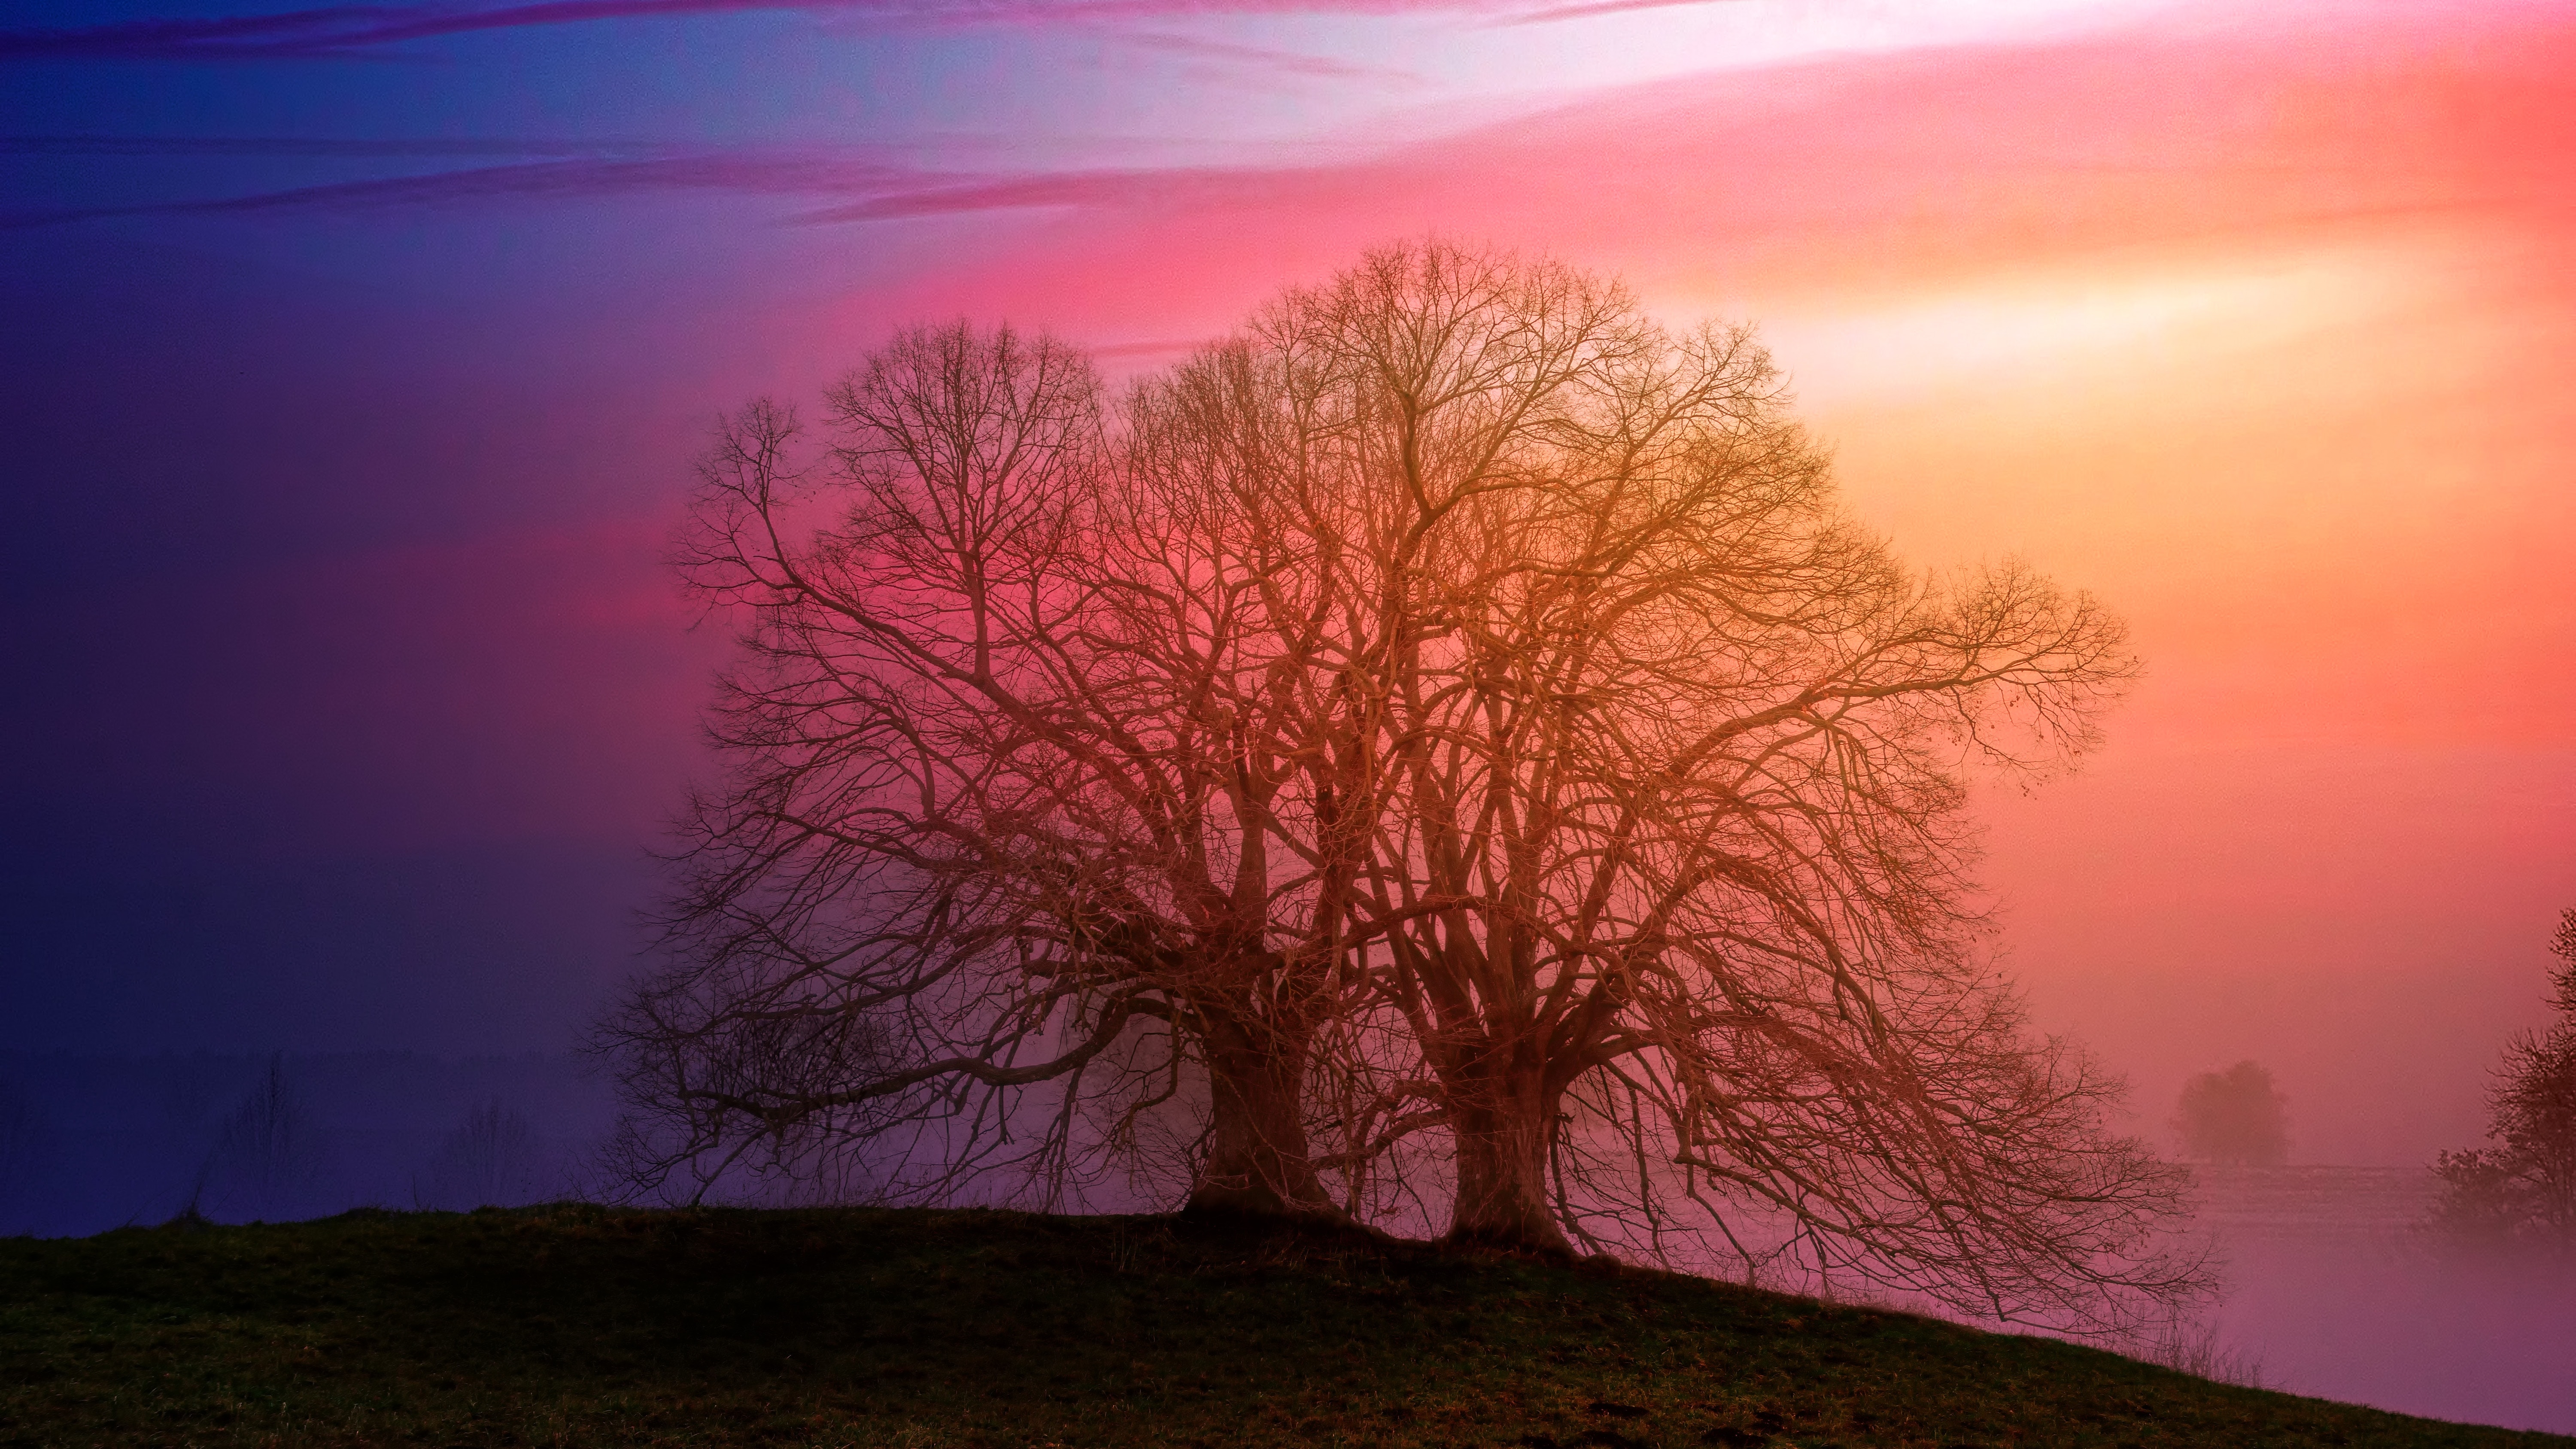 Two old trees standing bare on a hill with an orange, pink, and purple sunset behind them